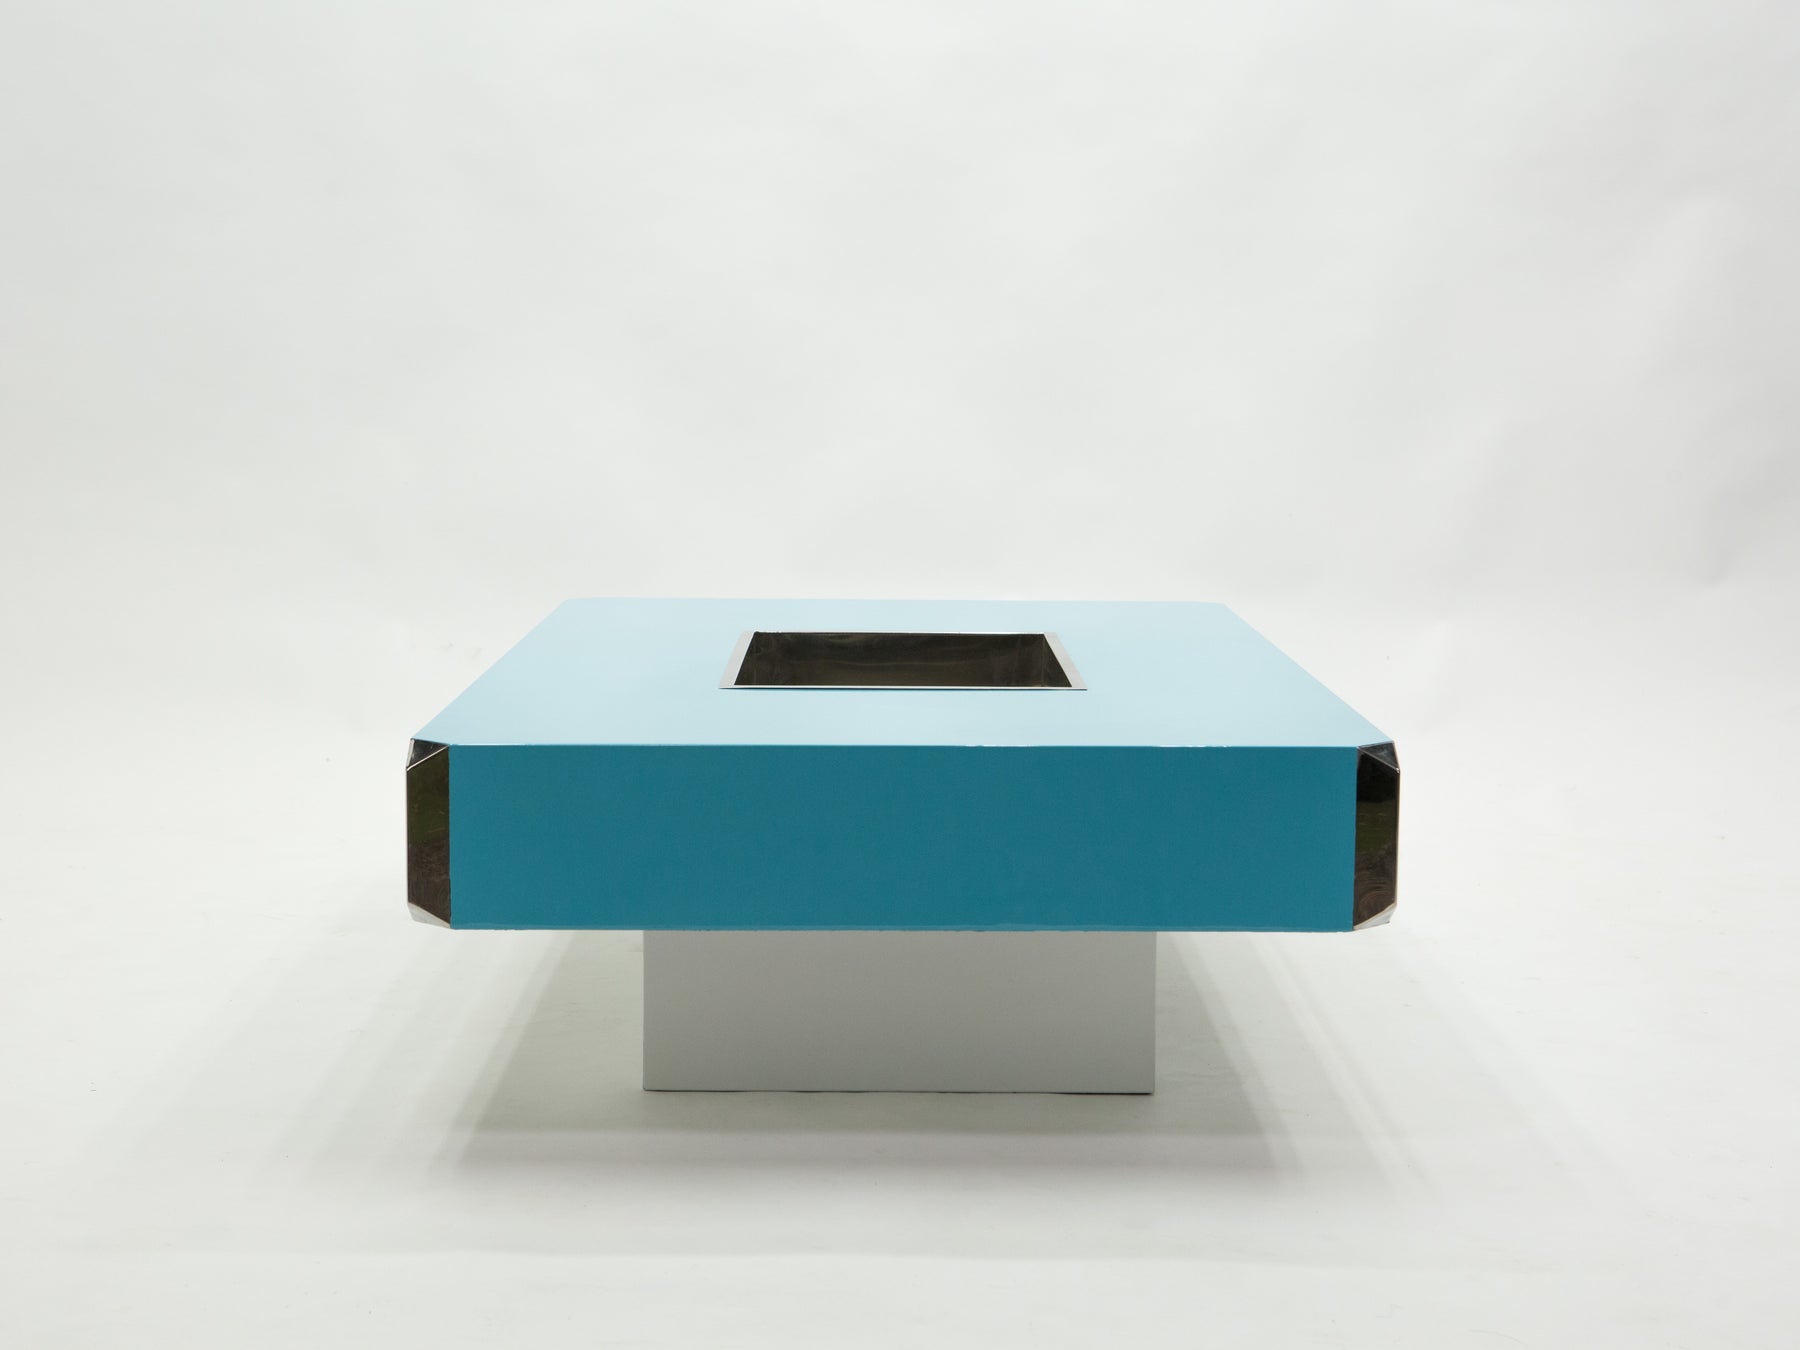 Willy Rizzo blue lacquer and chrome bar coffee table Alveo 1970s